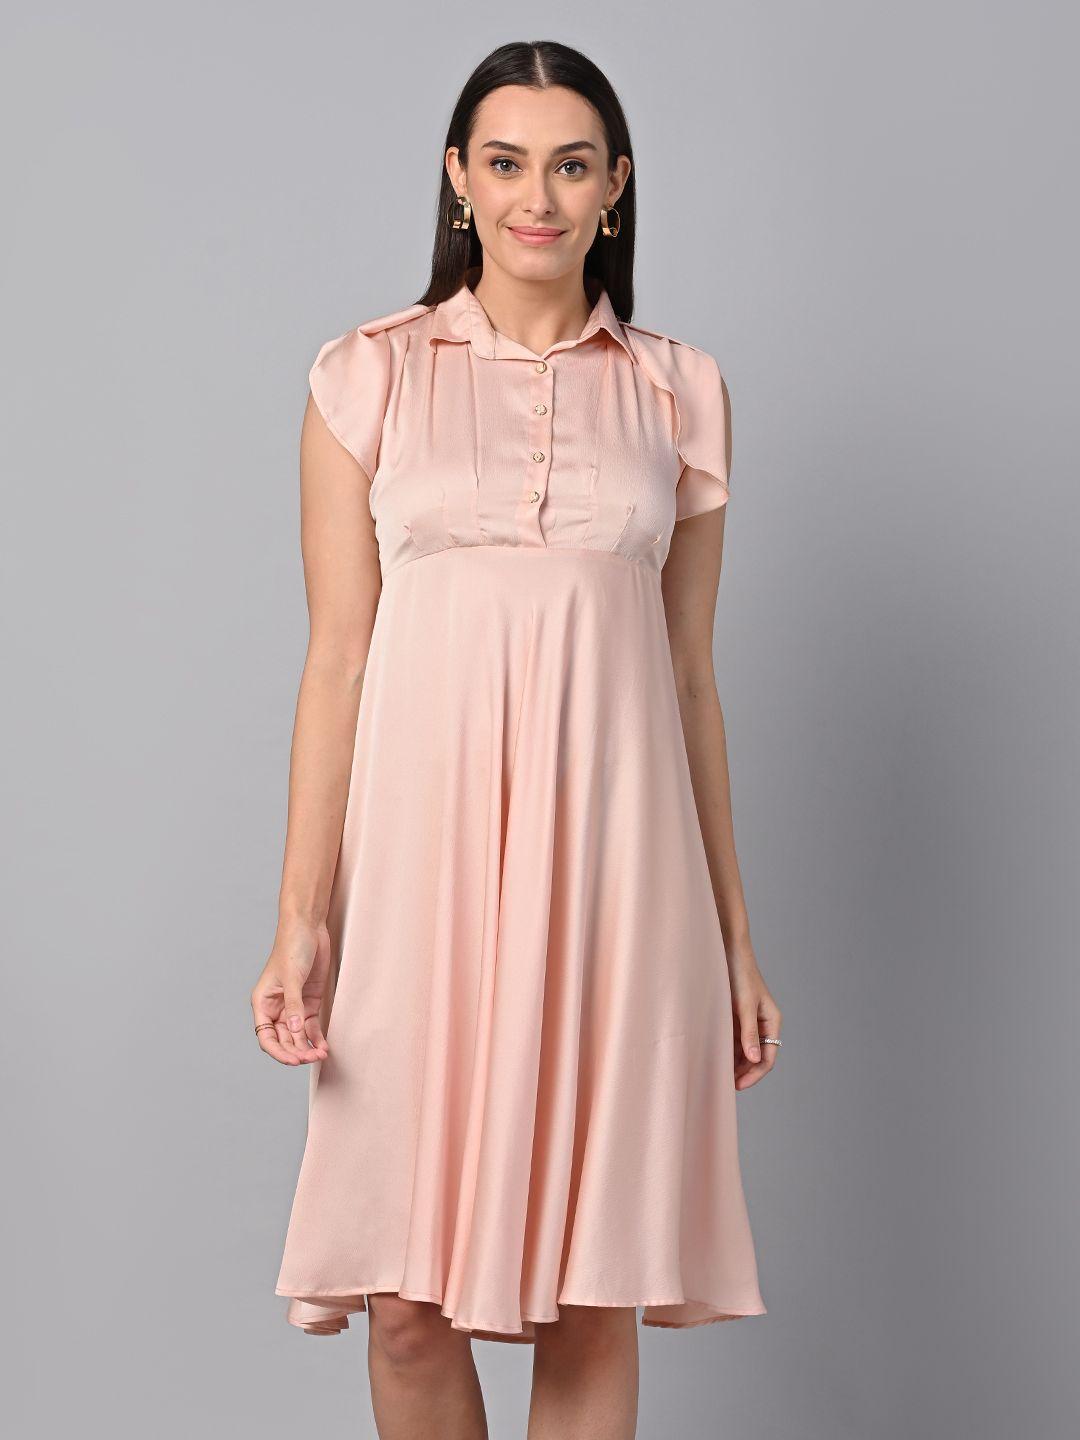 justin whyte shirt collar roll-up sleeves gathered fit & flare midi dress